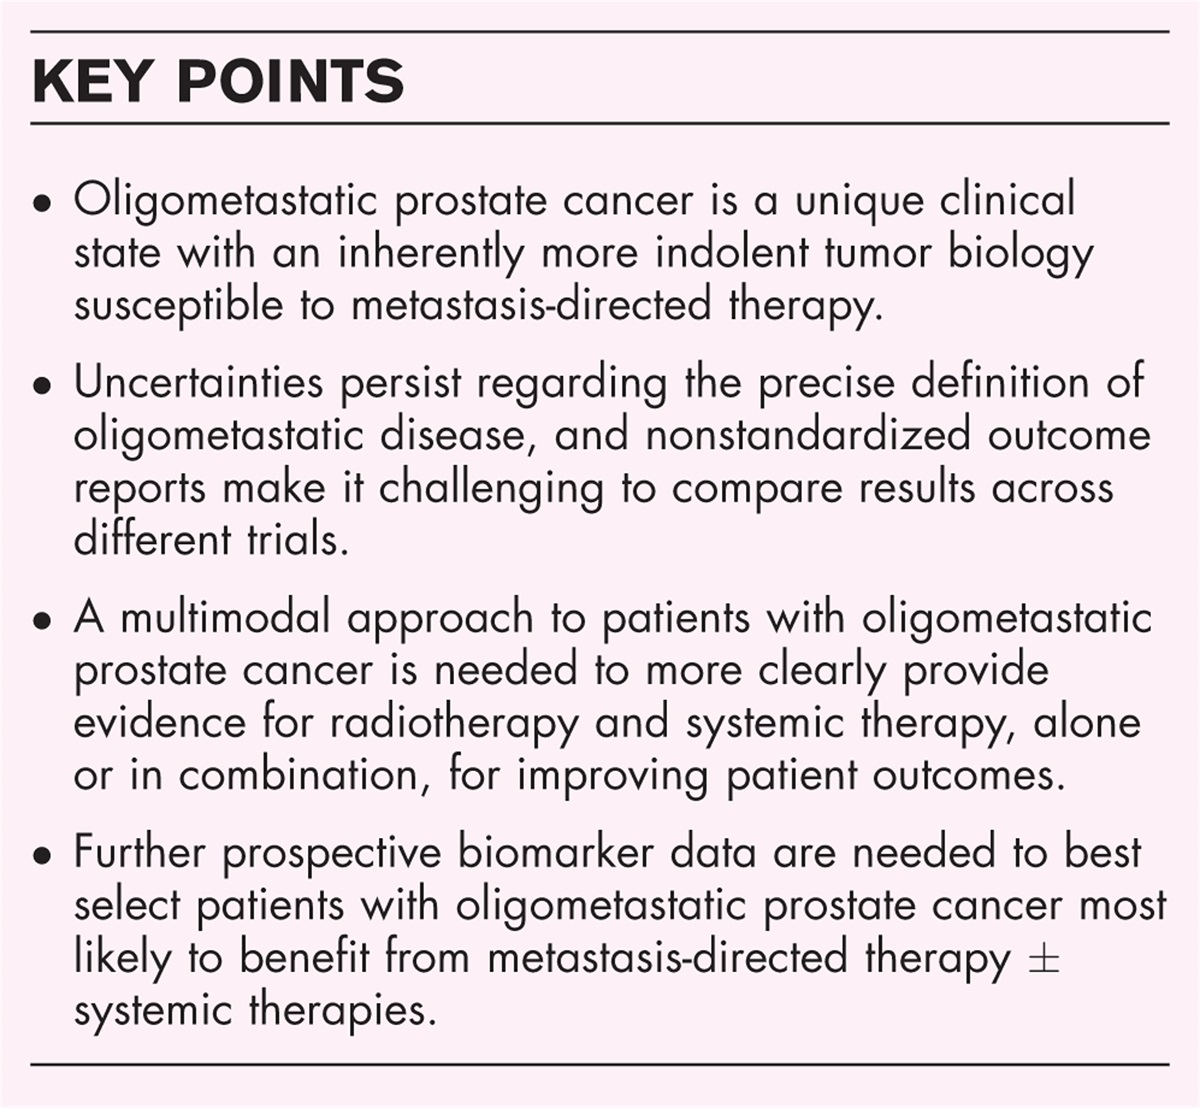 Stereotactic ablative radiation therapy in metastatic prostate cancer